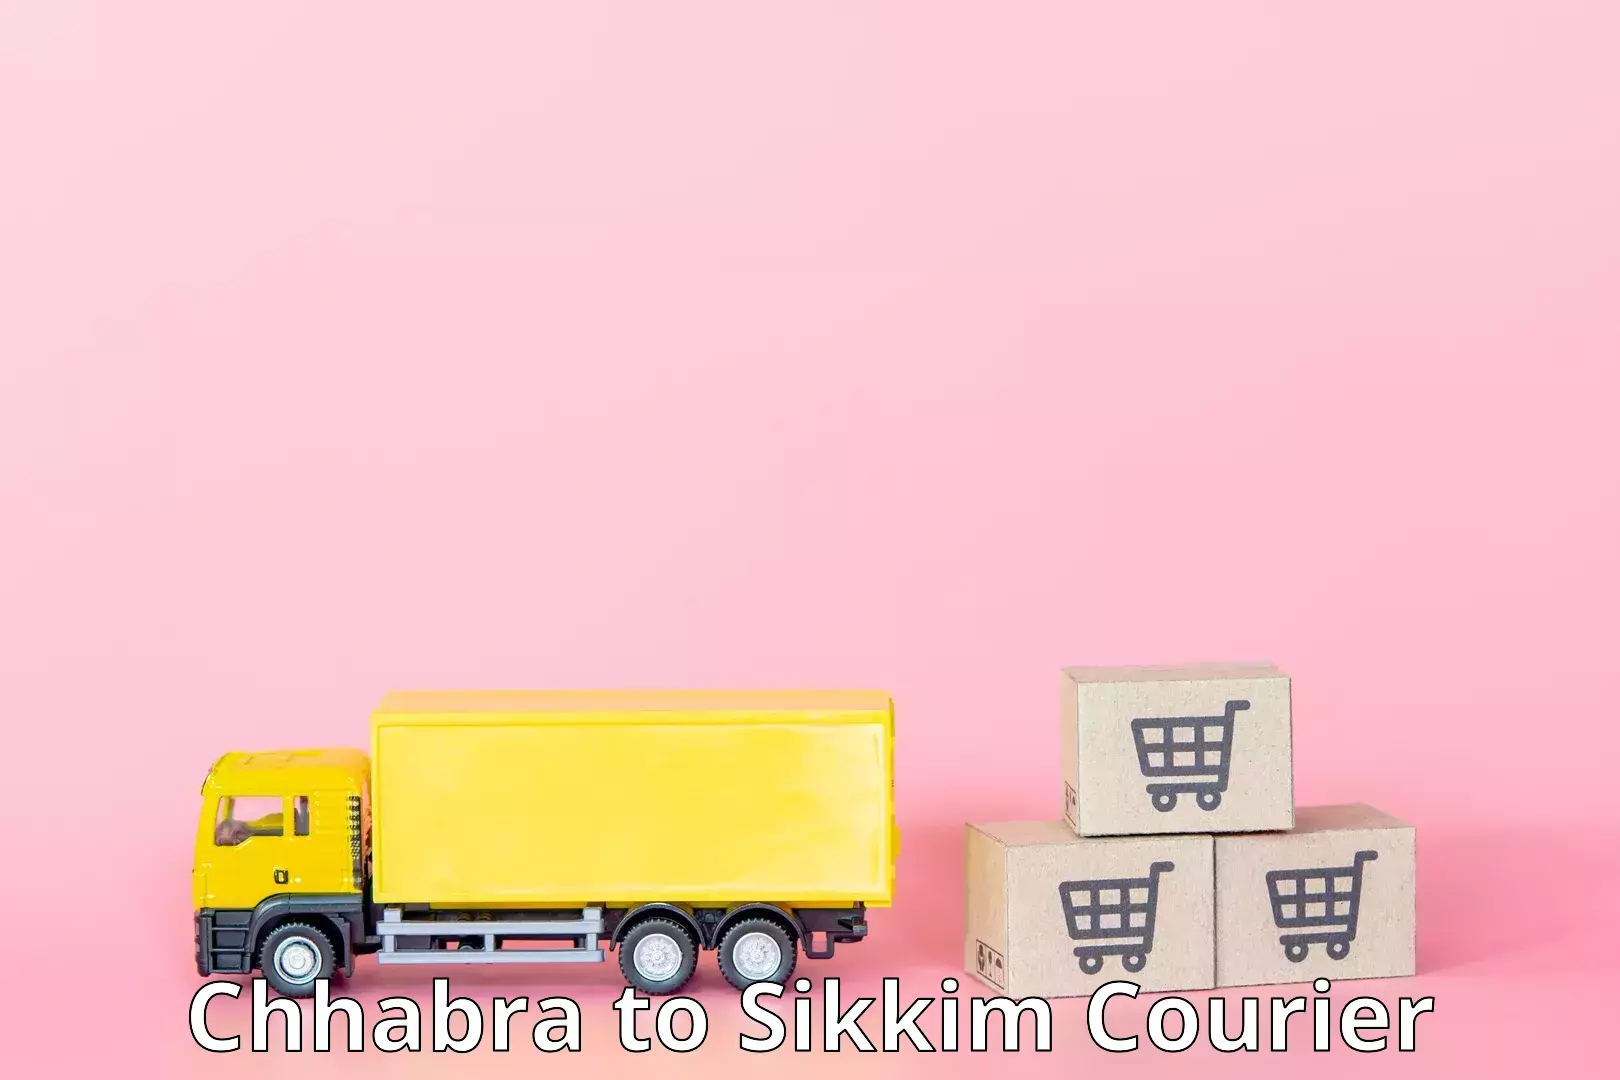 High-capacity parcel service Chhabra to West Sikkim